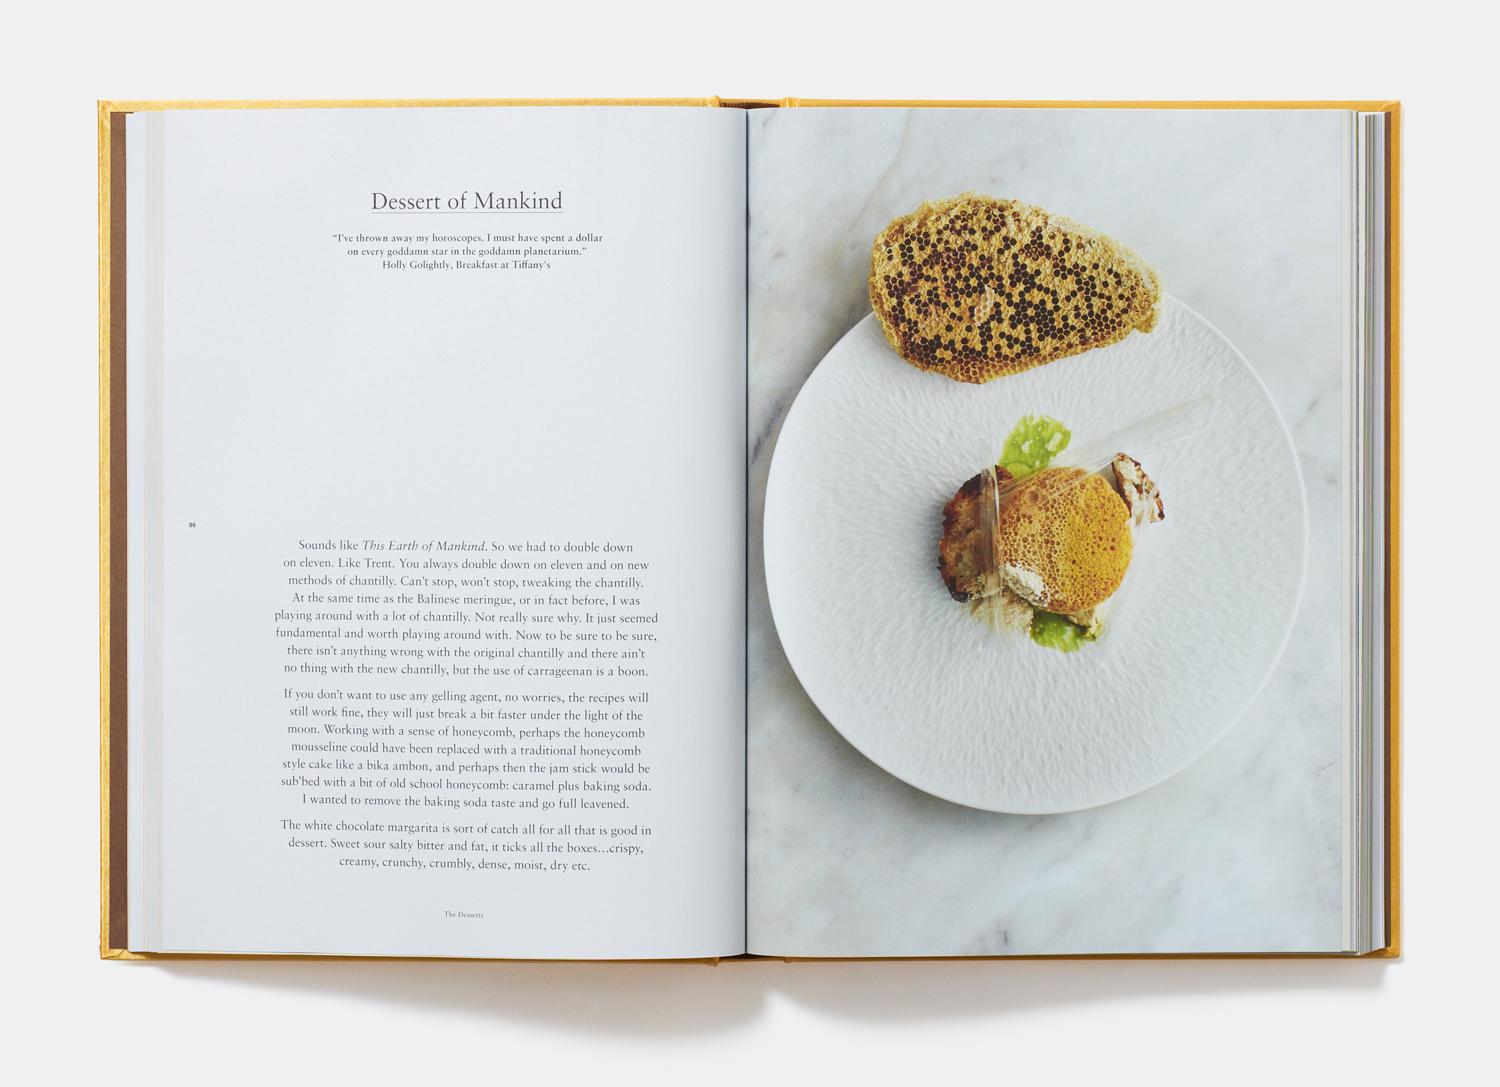 The definitive guide to perfect pastry from the acclaimed former elBulli pastry chef and his destination restaurant in Bali

As seen on Netflix series Chef's Table: Pastry.

Will Goldfarb showcases a menu of desserts and fine pastry work at